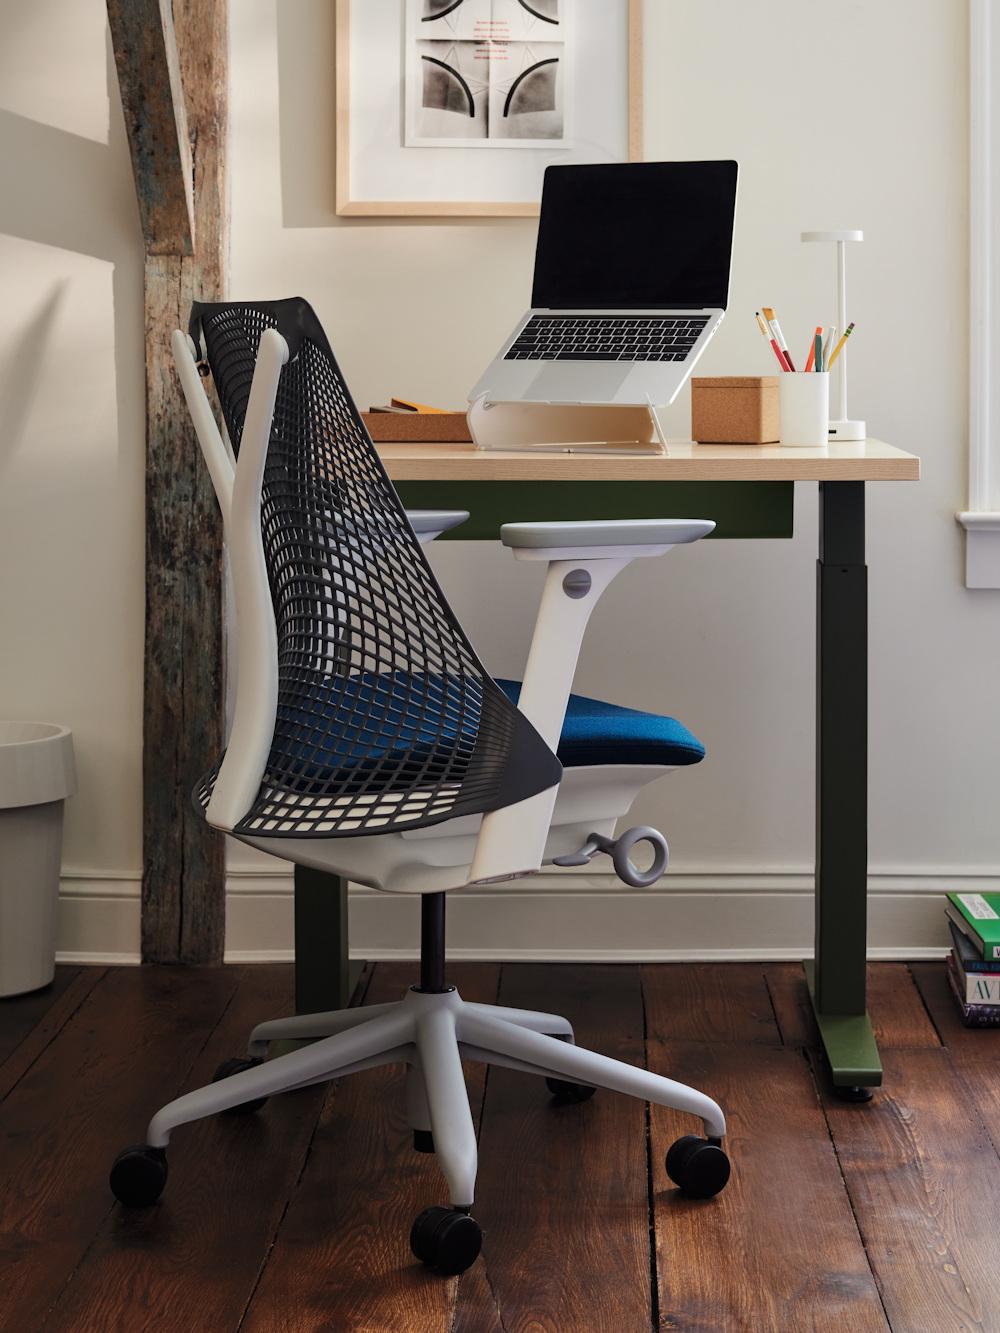 The Home Office Gear Wirecutter Staffers Bought to Make It Through